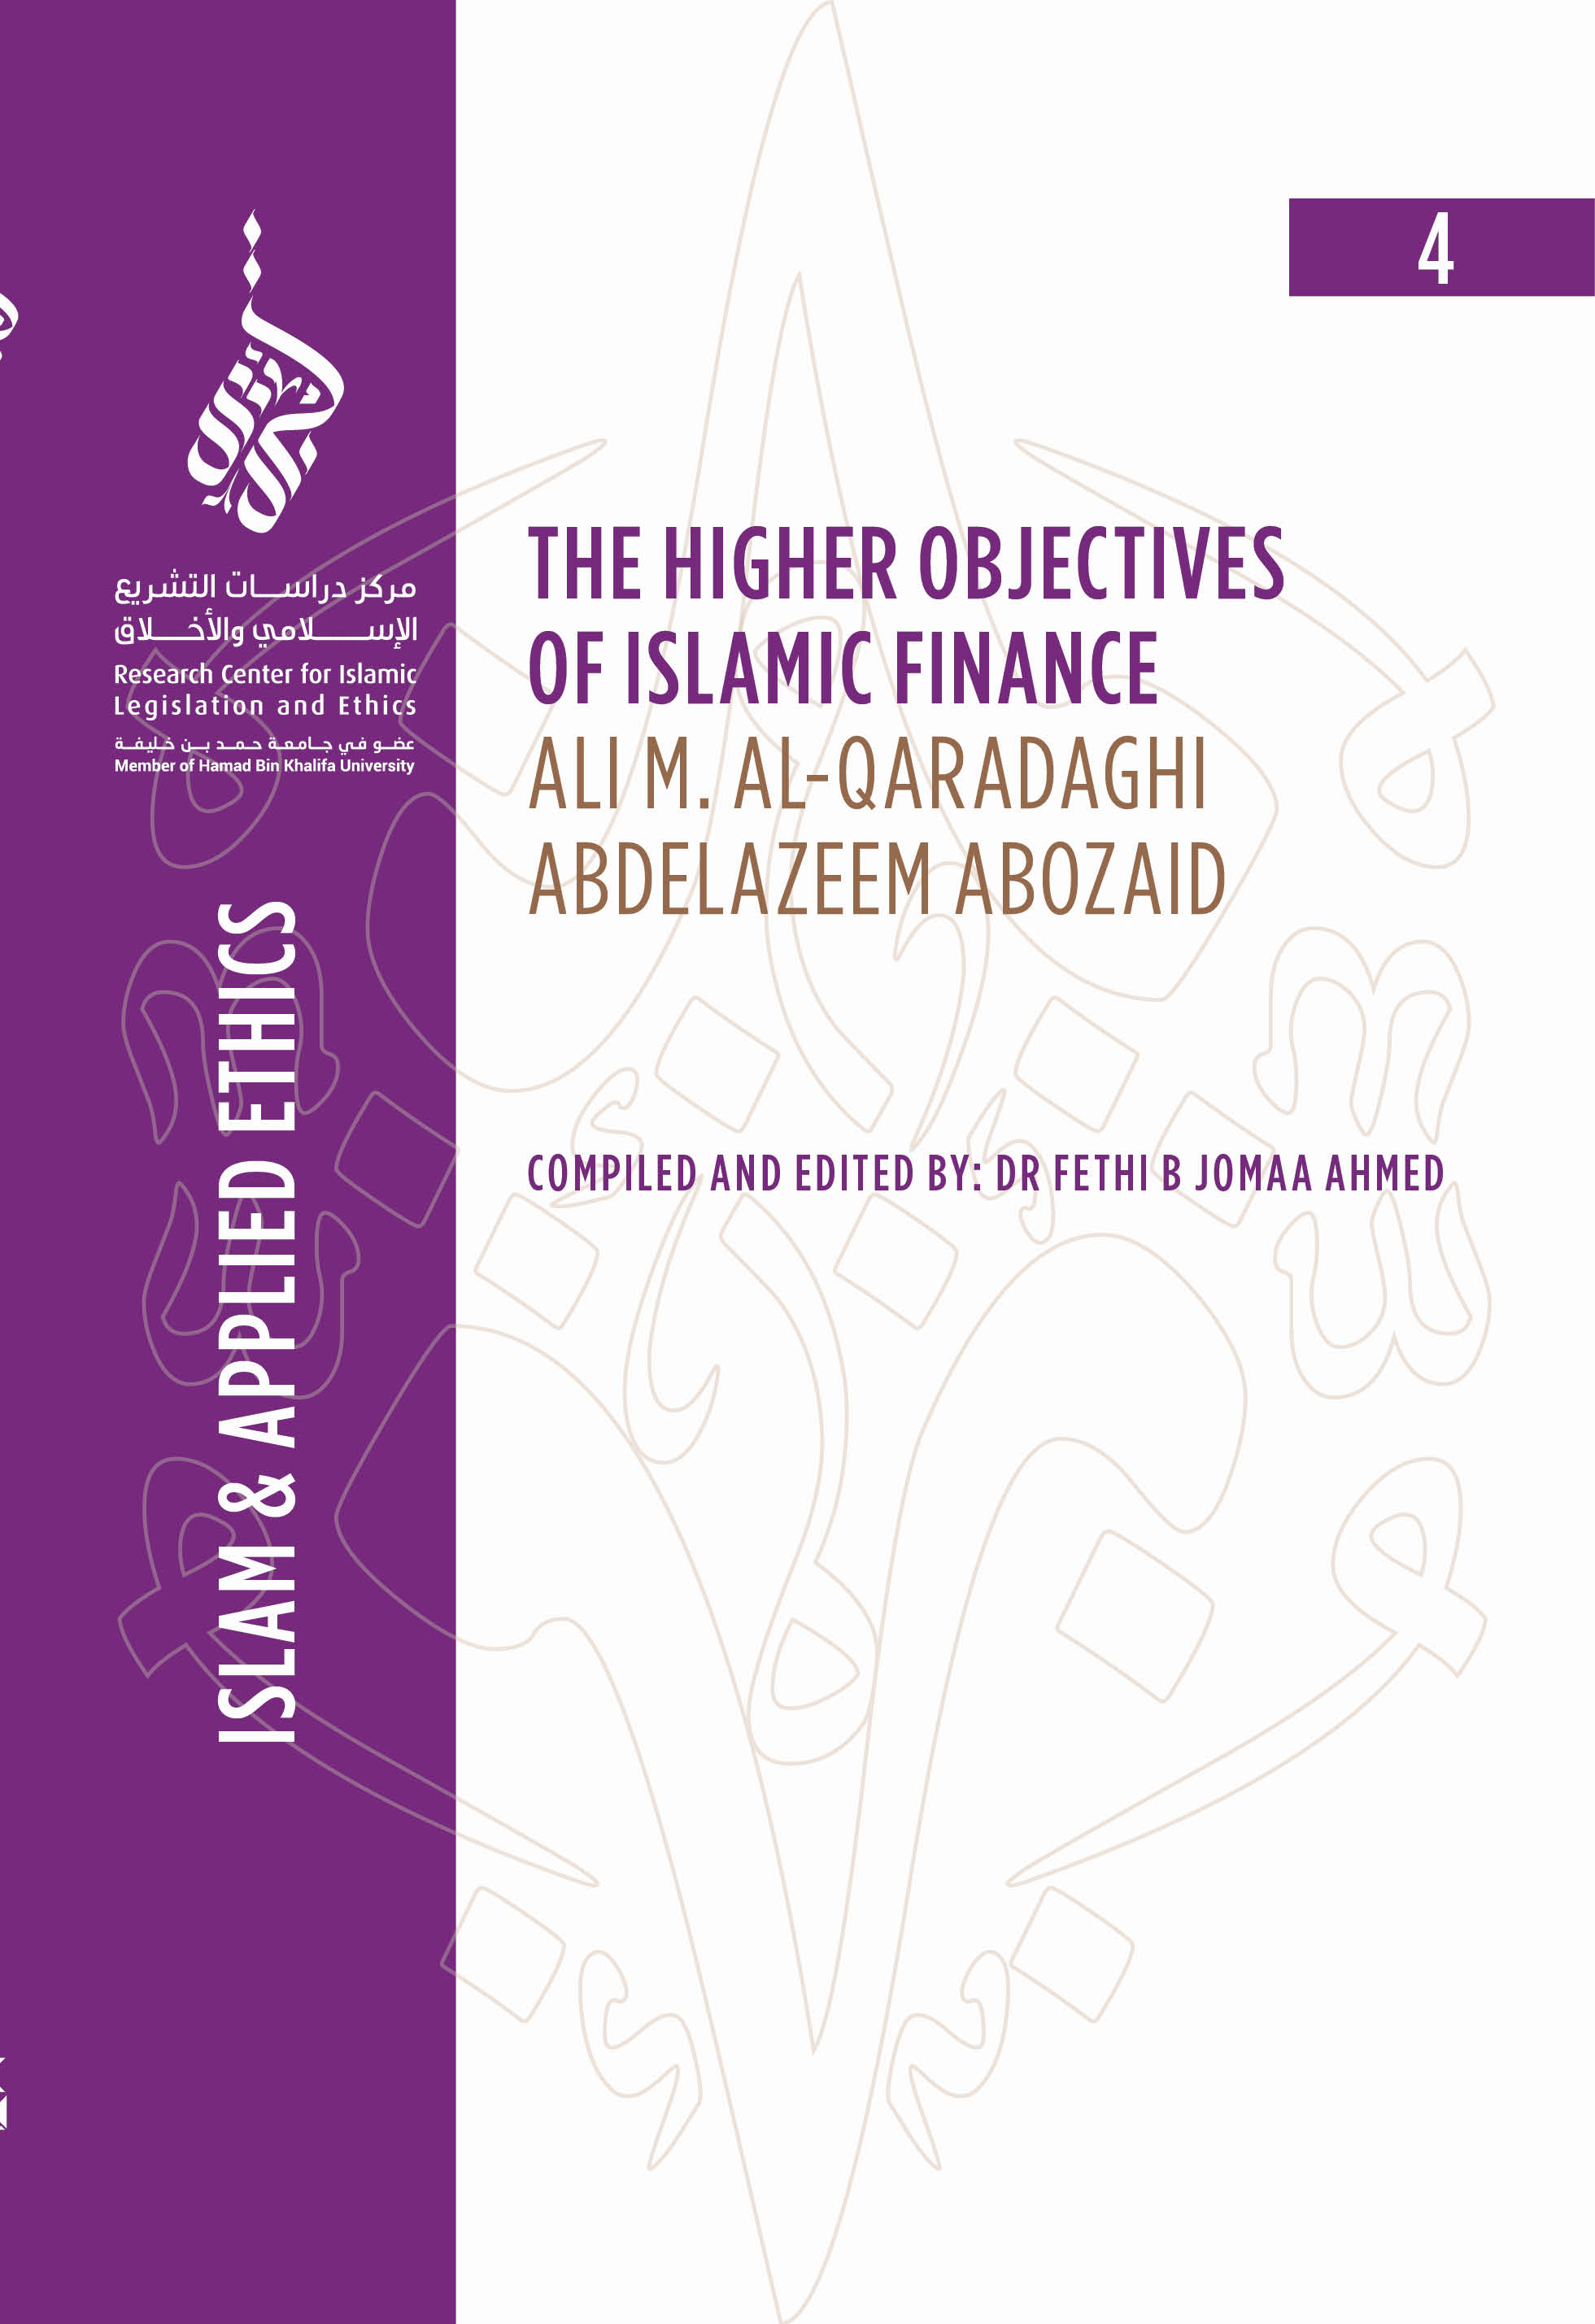 The Higher Objectives of Islamic Finance